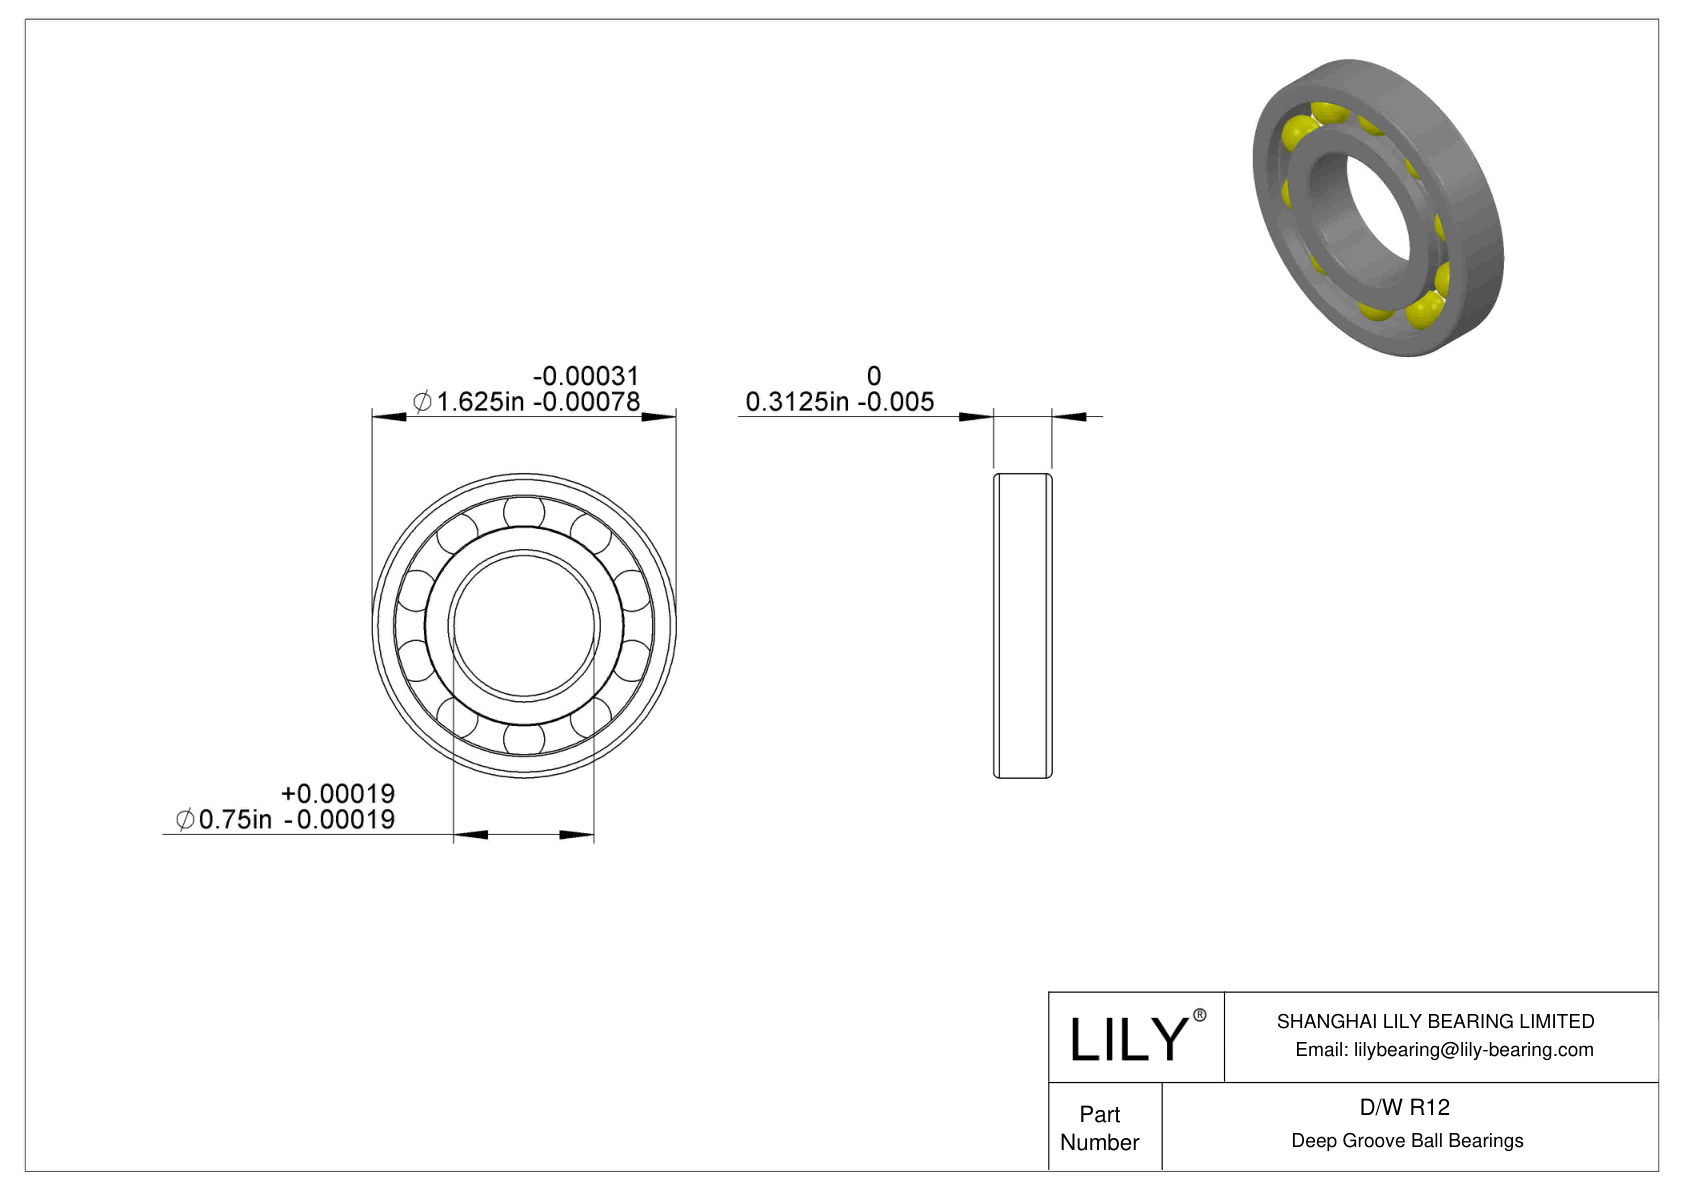 D/W R12 Stainless Steel Deep Groove Ball Bearings cad drawing